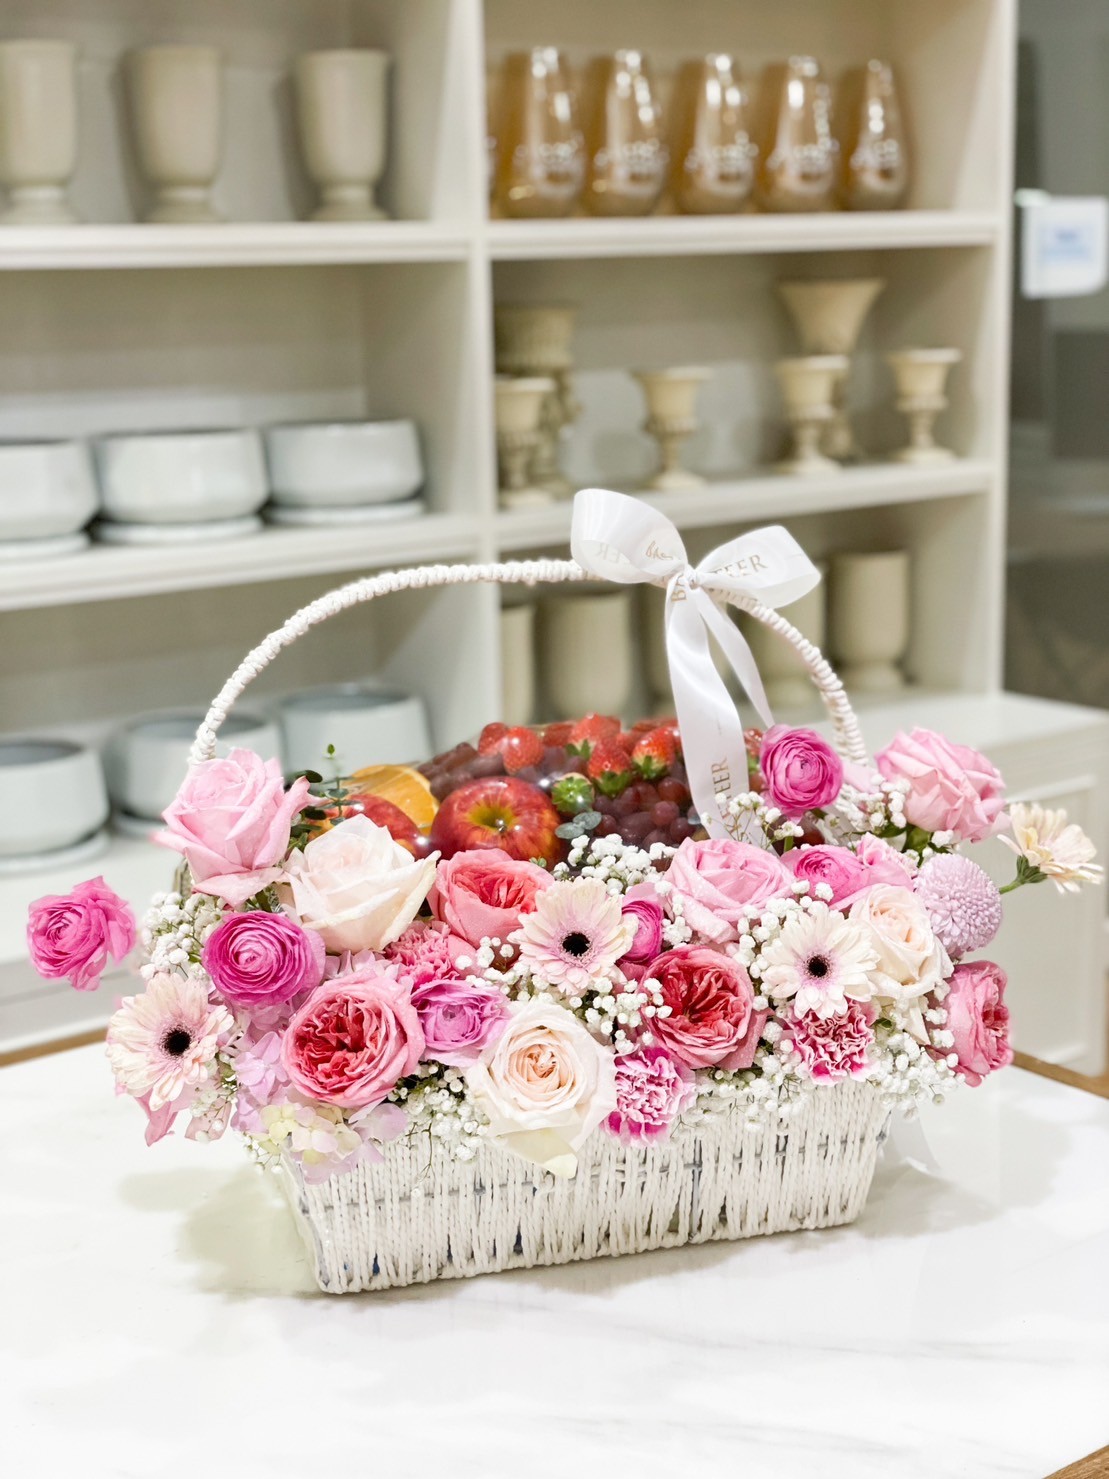 Sweet Pink Flowers With Fresh Fruits In The White Basket